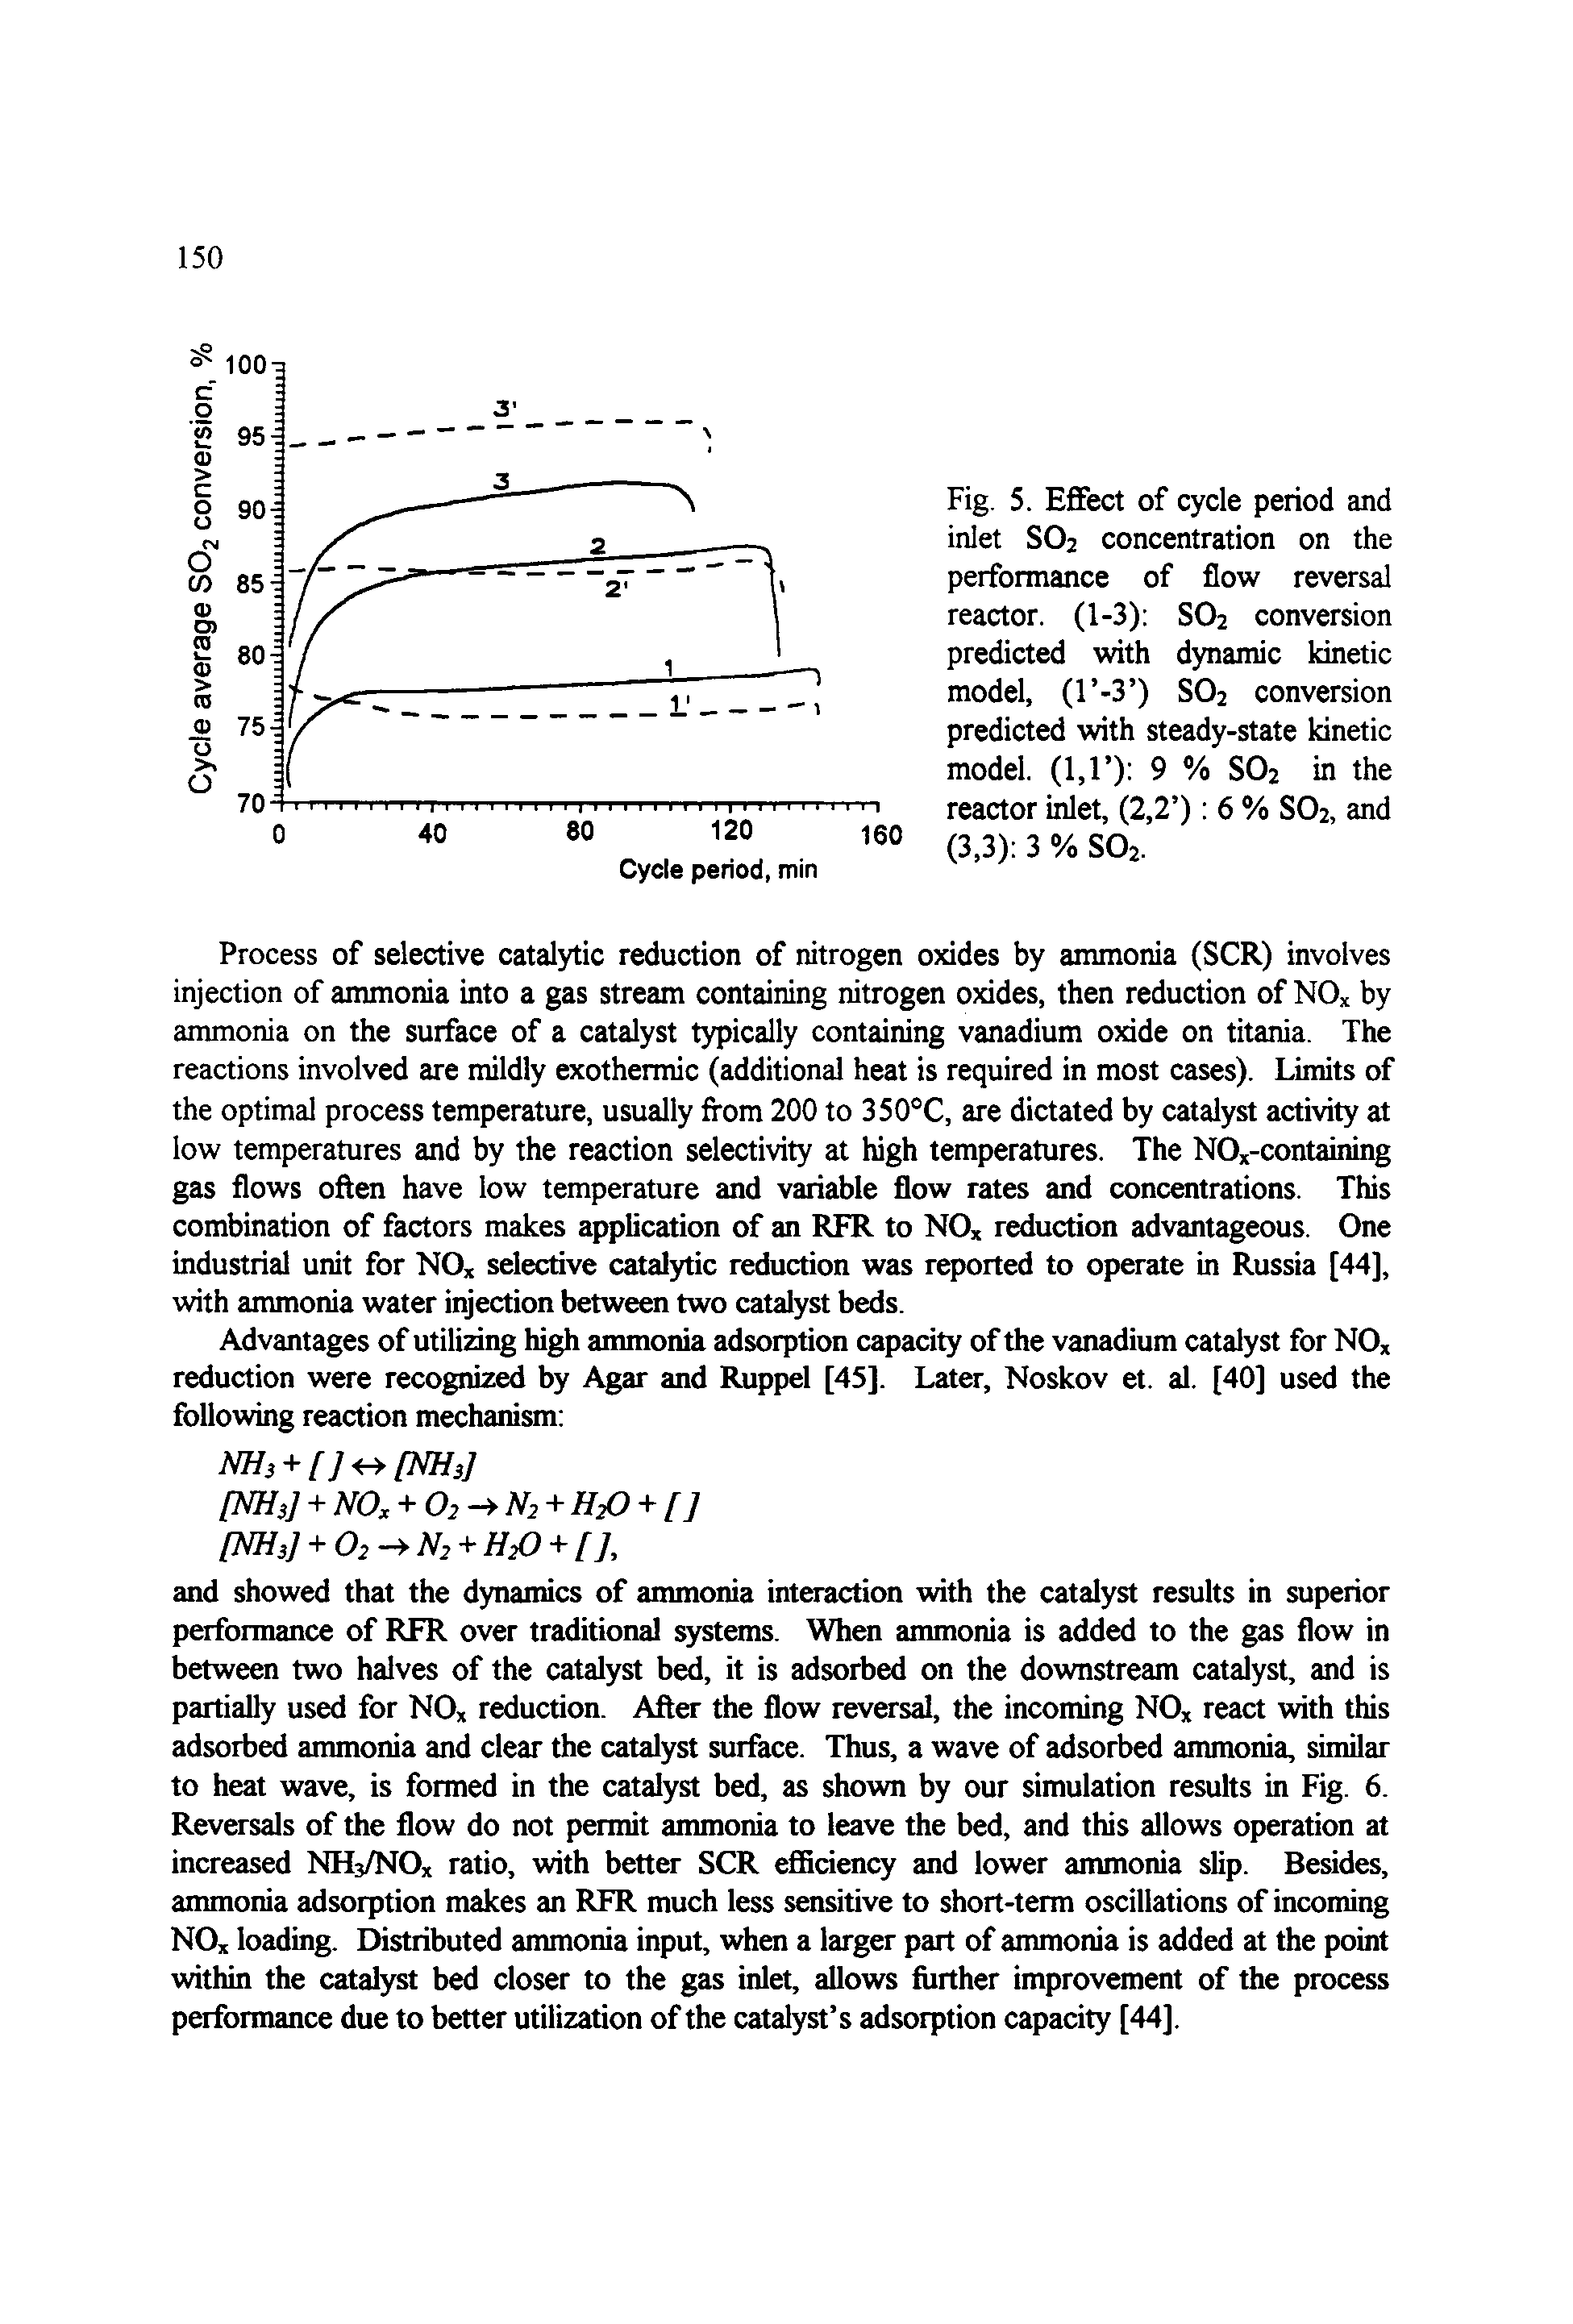 Fig. 5. Effect of cycle period and inlet SO2 concentration on the performance of flow reversal reactor. (1-3) SO2 conversion predicted with dynamic kinetic model, (l -3 ) SO2 conversion predicted with steady-state kinetic model. (1,1 ) 9 % SO2 in the reactor inlet, (2,2 ) 6 % SO2, and (3,3) 3 % SO2.